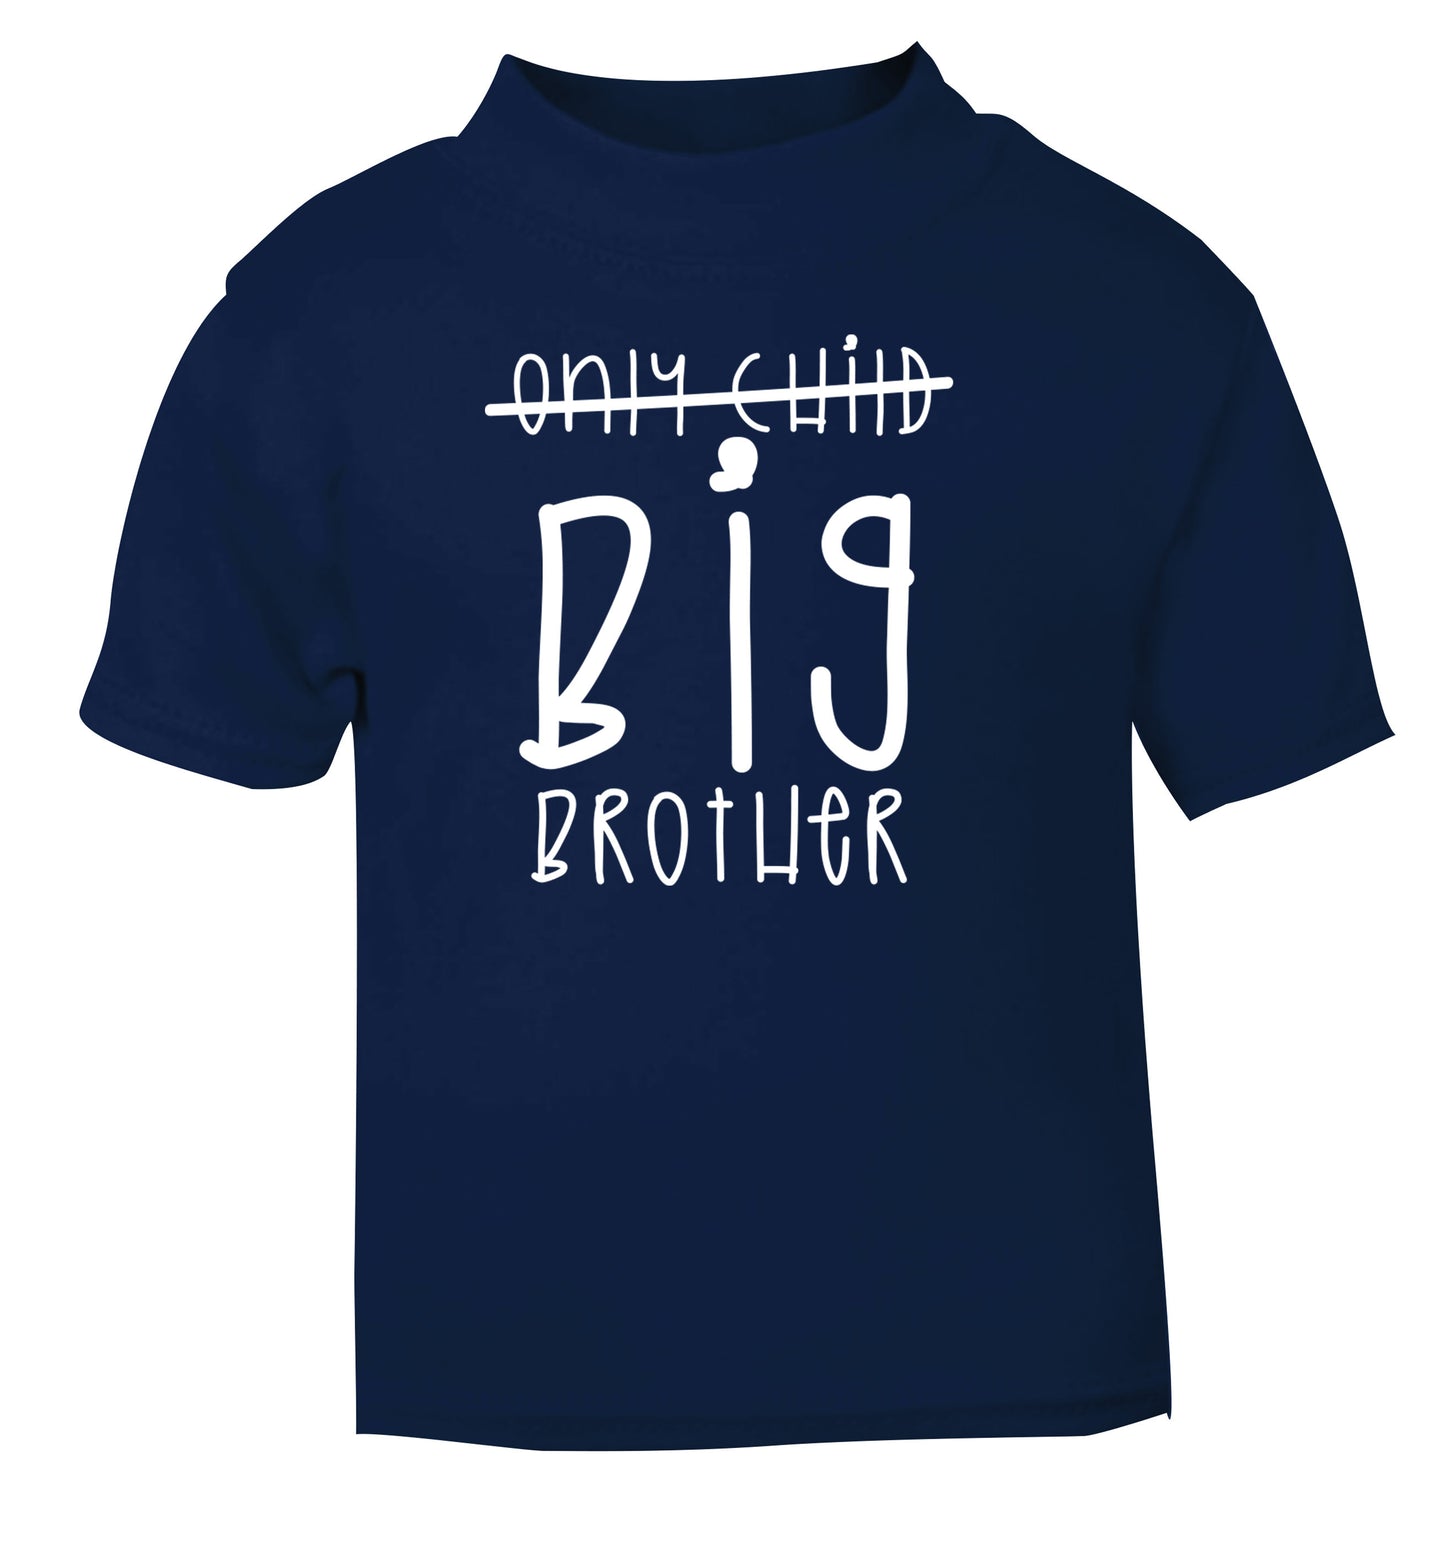 Only child big brother navy Baby Toddler Tshirt 2 Years